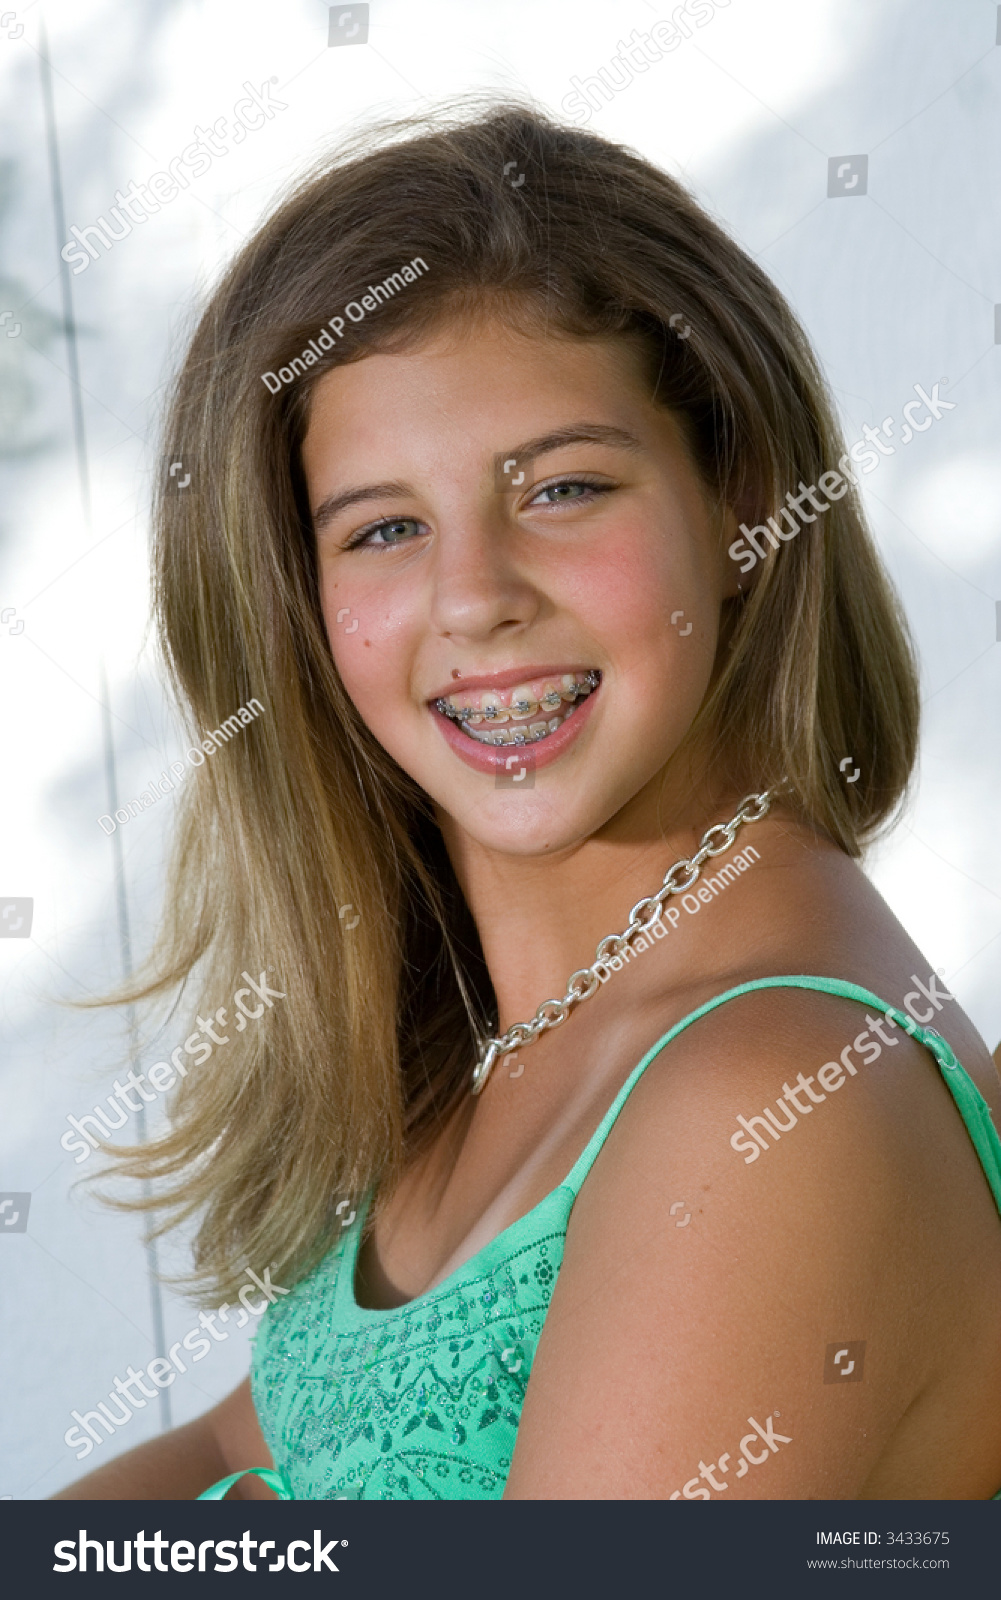 Teen Girls With Braces